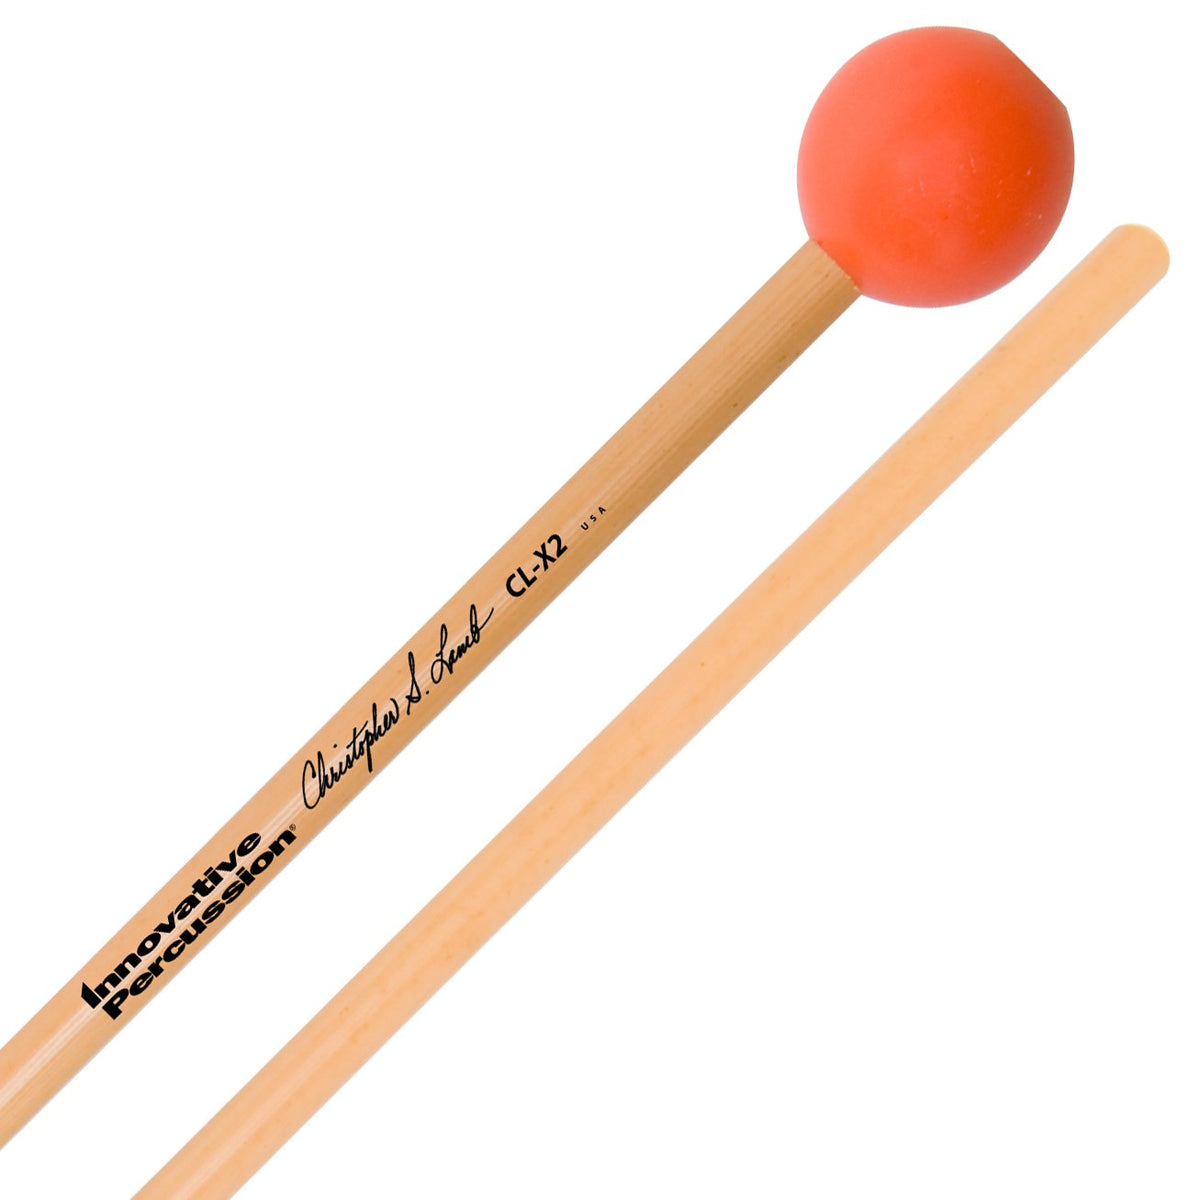 Innovative Percussion - Christopher Lamb Orchestral Series Concert Xylophone Mallets-Percussion-Innovative Percussion-CL-X2: Medium Dark-Music Elements